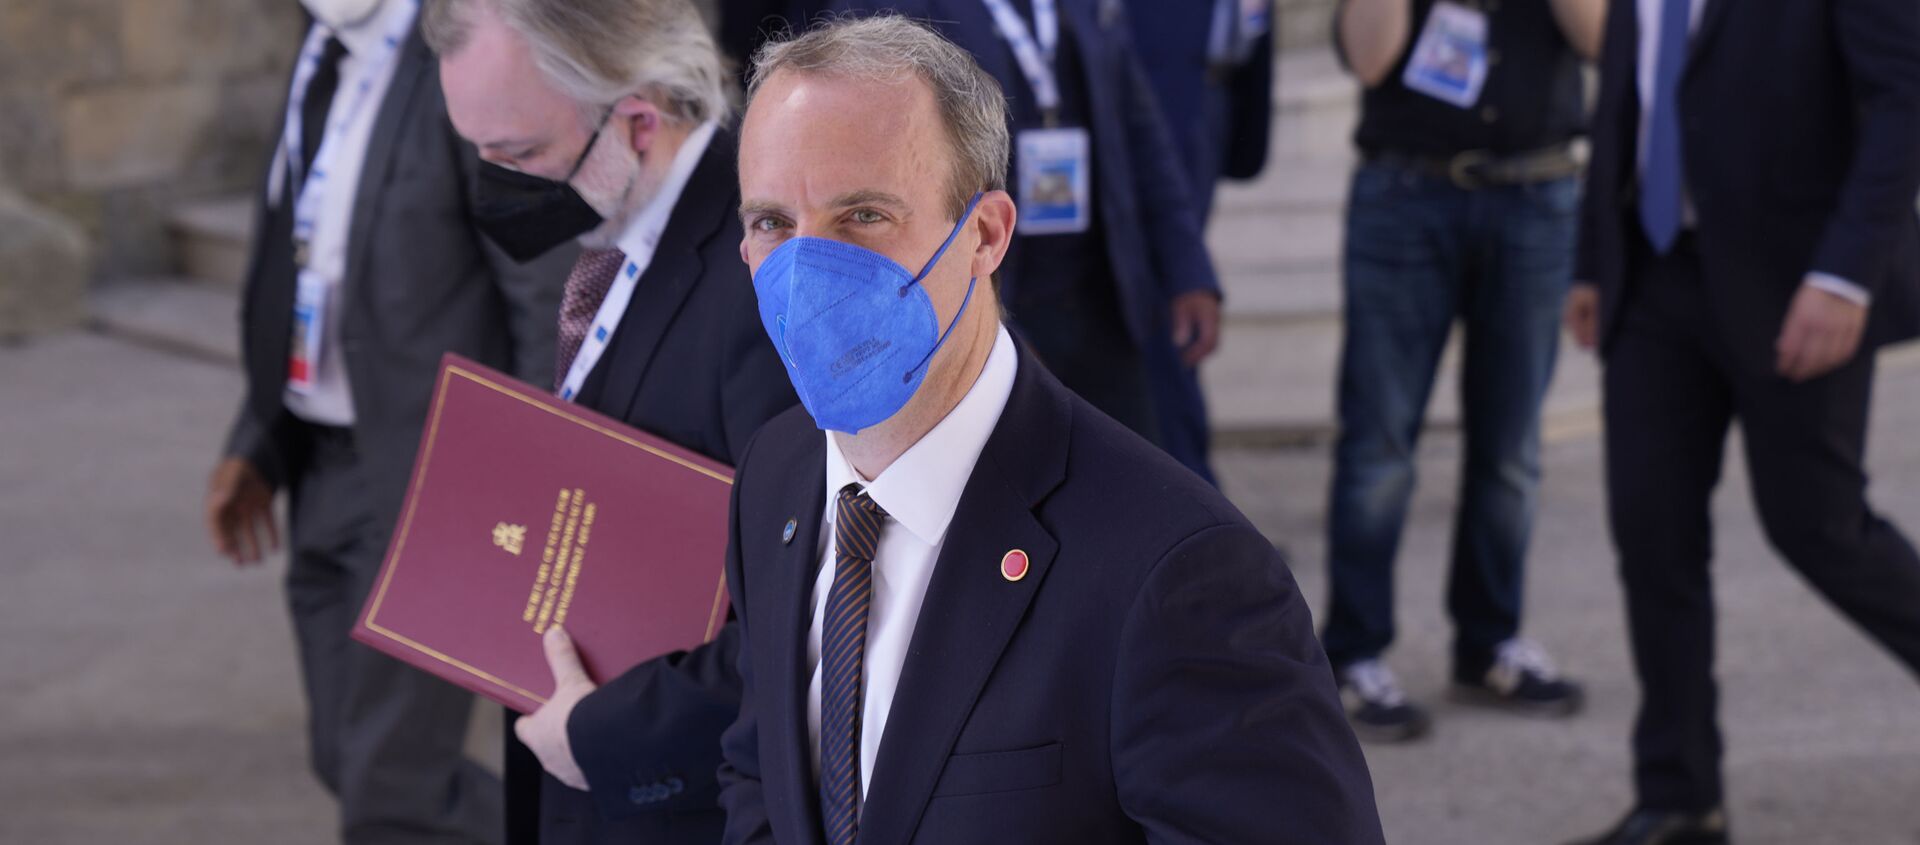 British Foreign Secretary Dominic Raab arrives in Matera, Italy, for a G20 foreign affairs ministers' meeting Tuesday, June 29, 2021. - Sputnik International, 1920